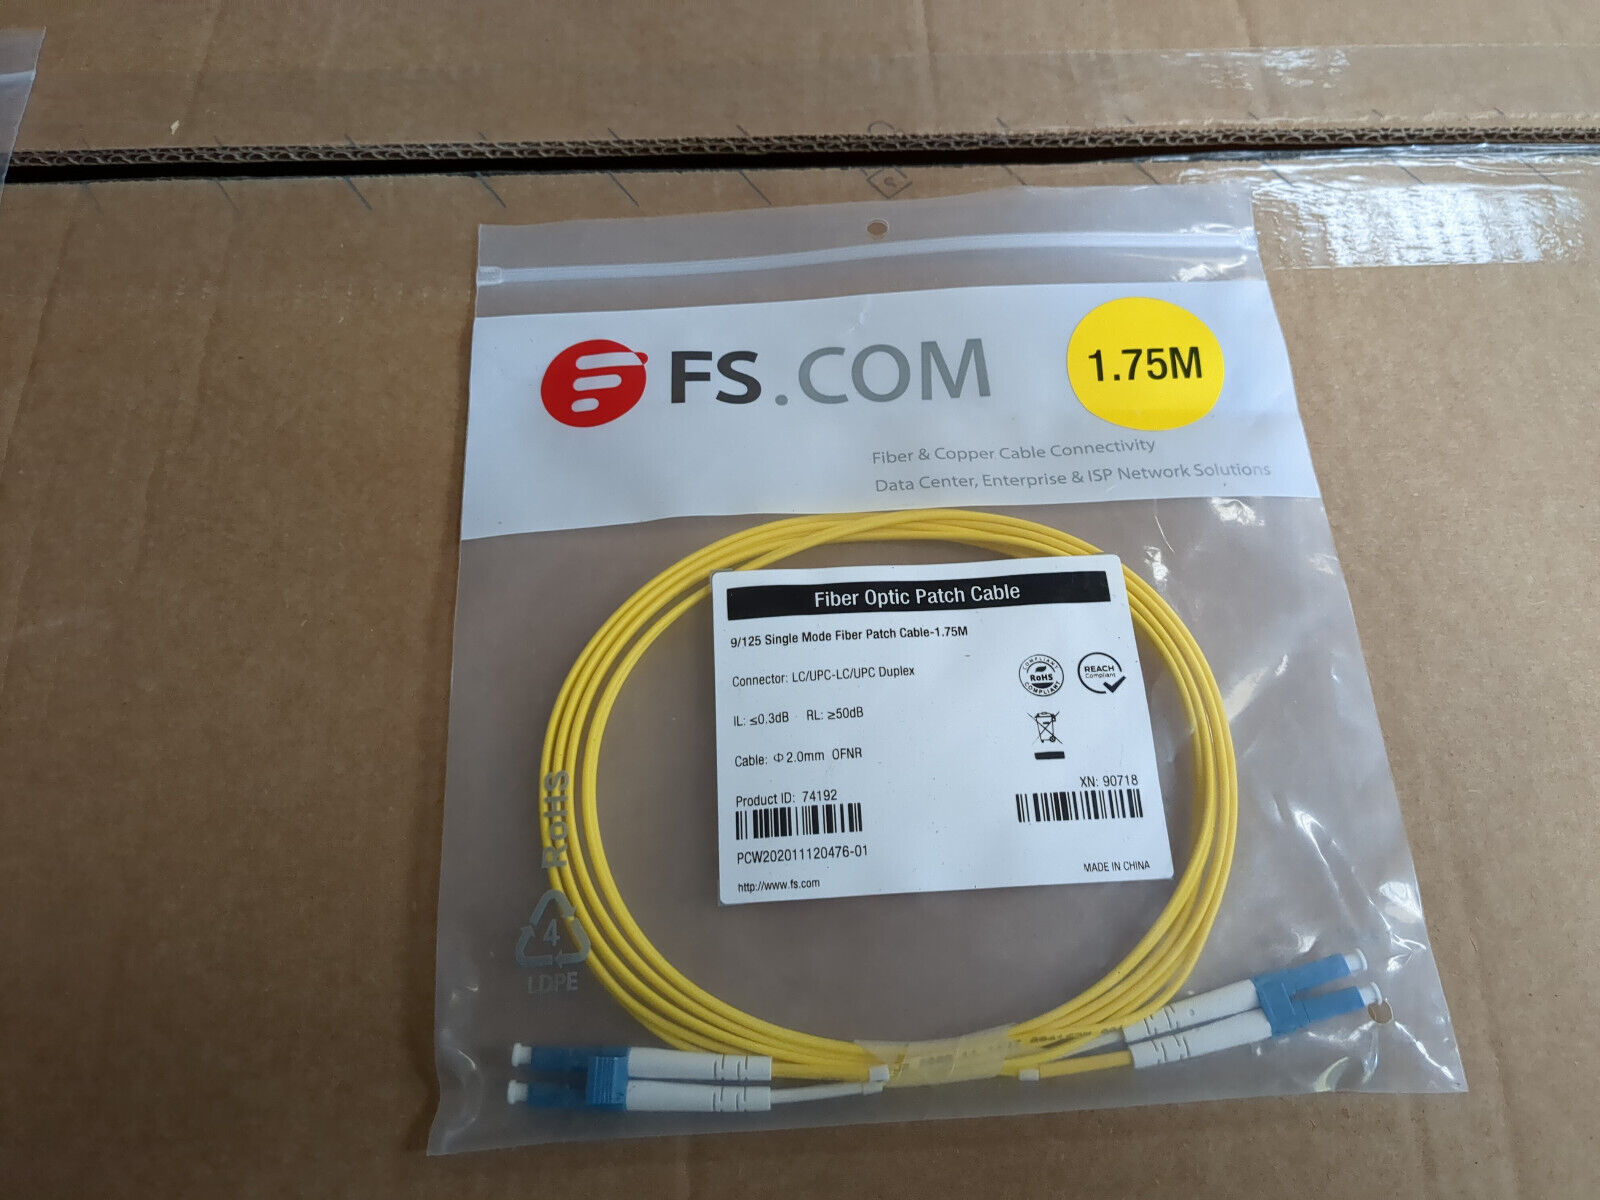 OS2 LC-LC 1.25 - 48 meter Duplex Fiber Patch Cable 9/125 Singlemode